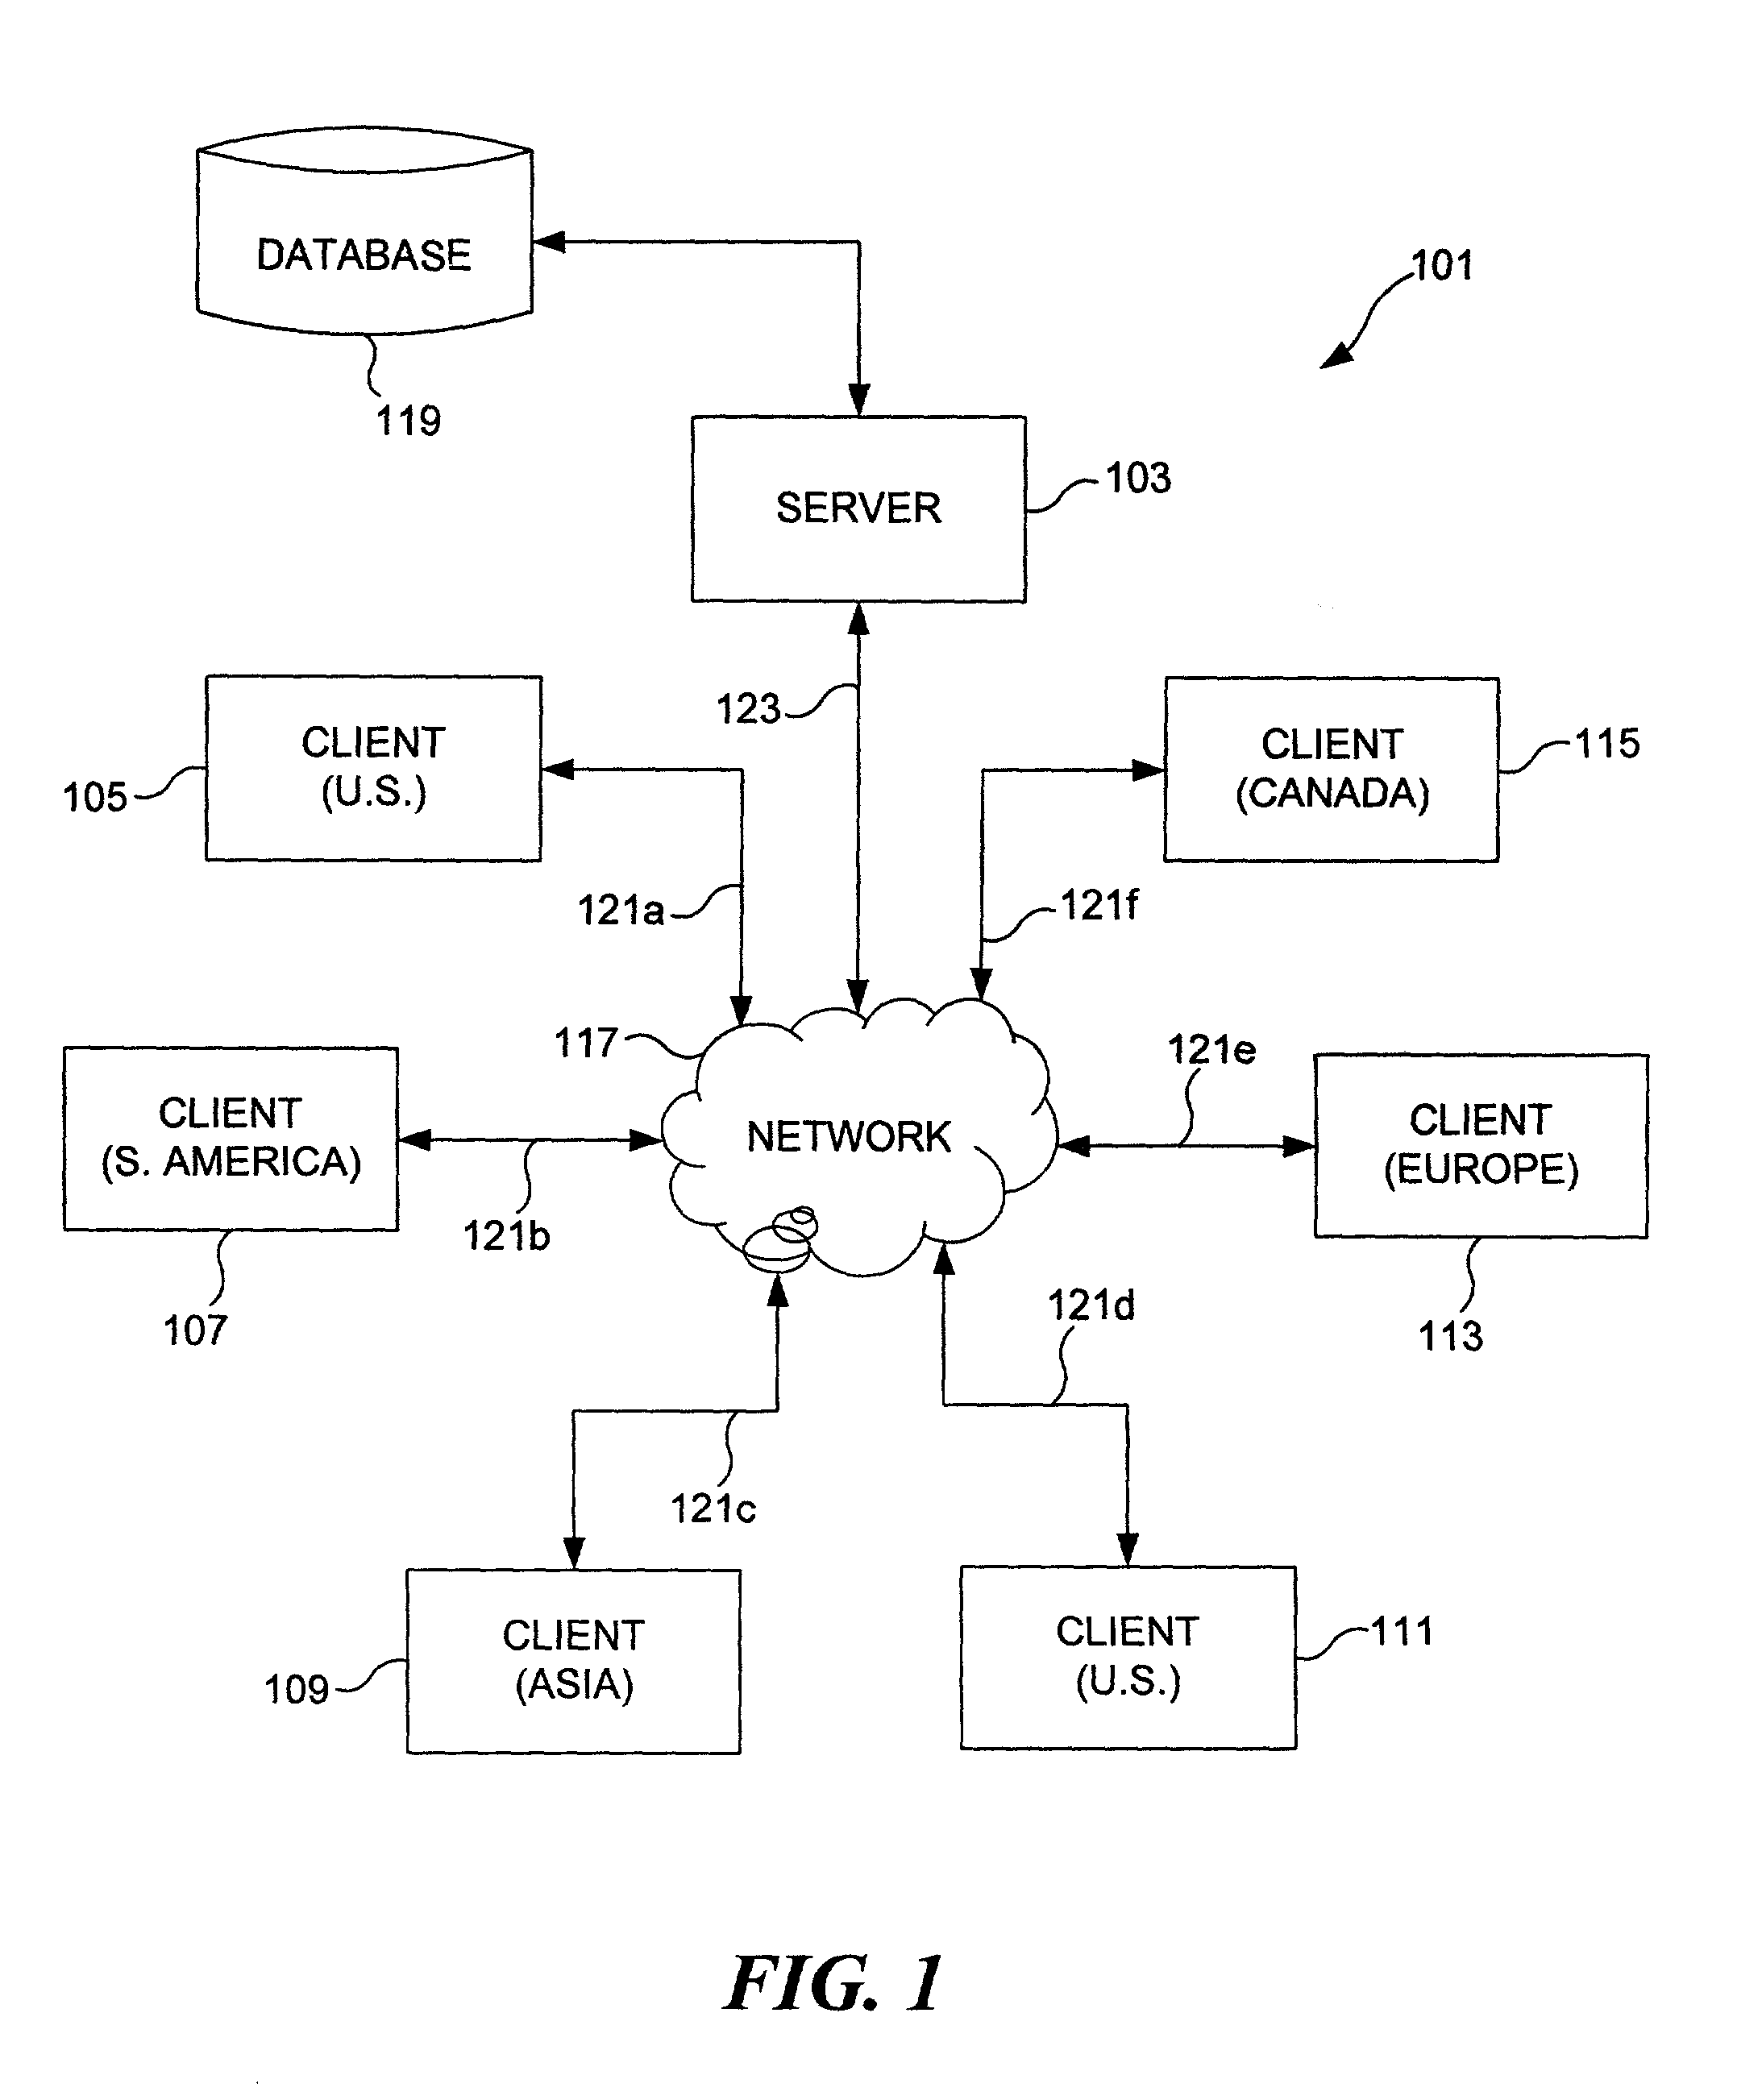 Methods and apparatus for centralized global tax computation, management, and compliance reporting